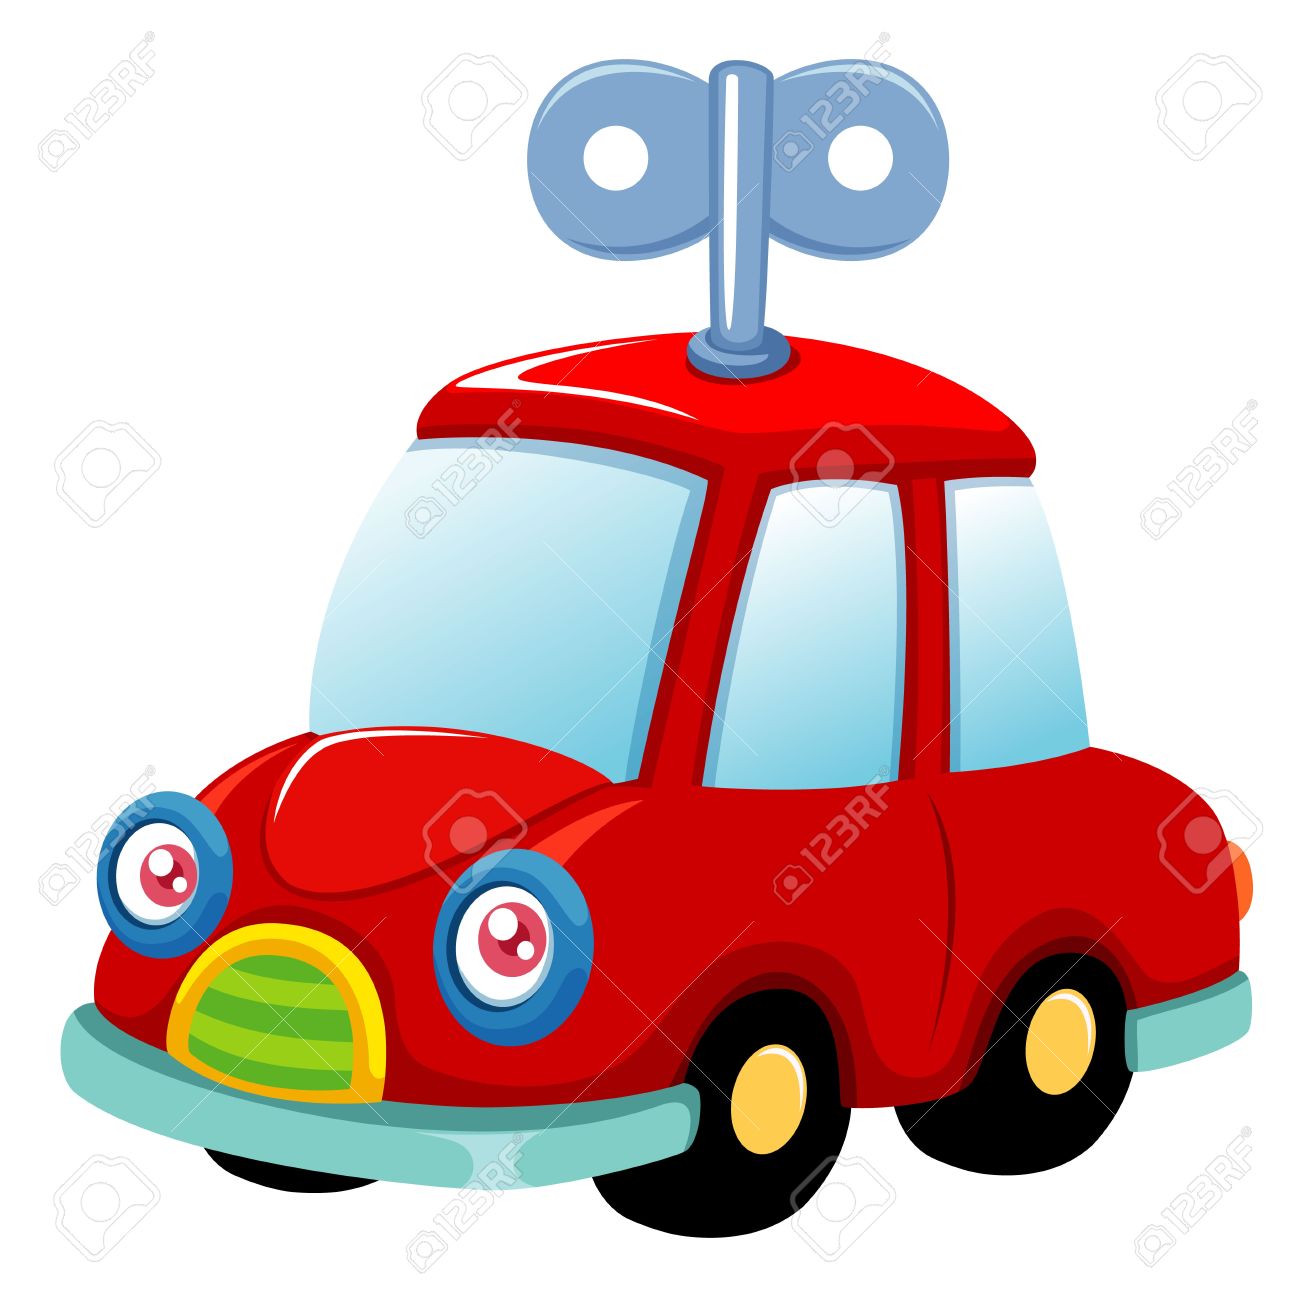 Car toy clipart.